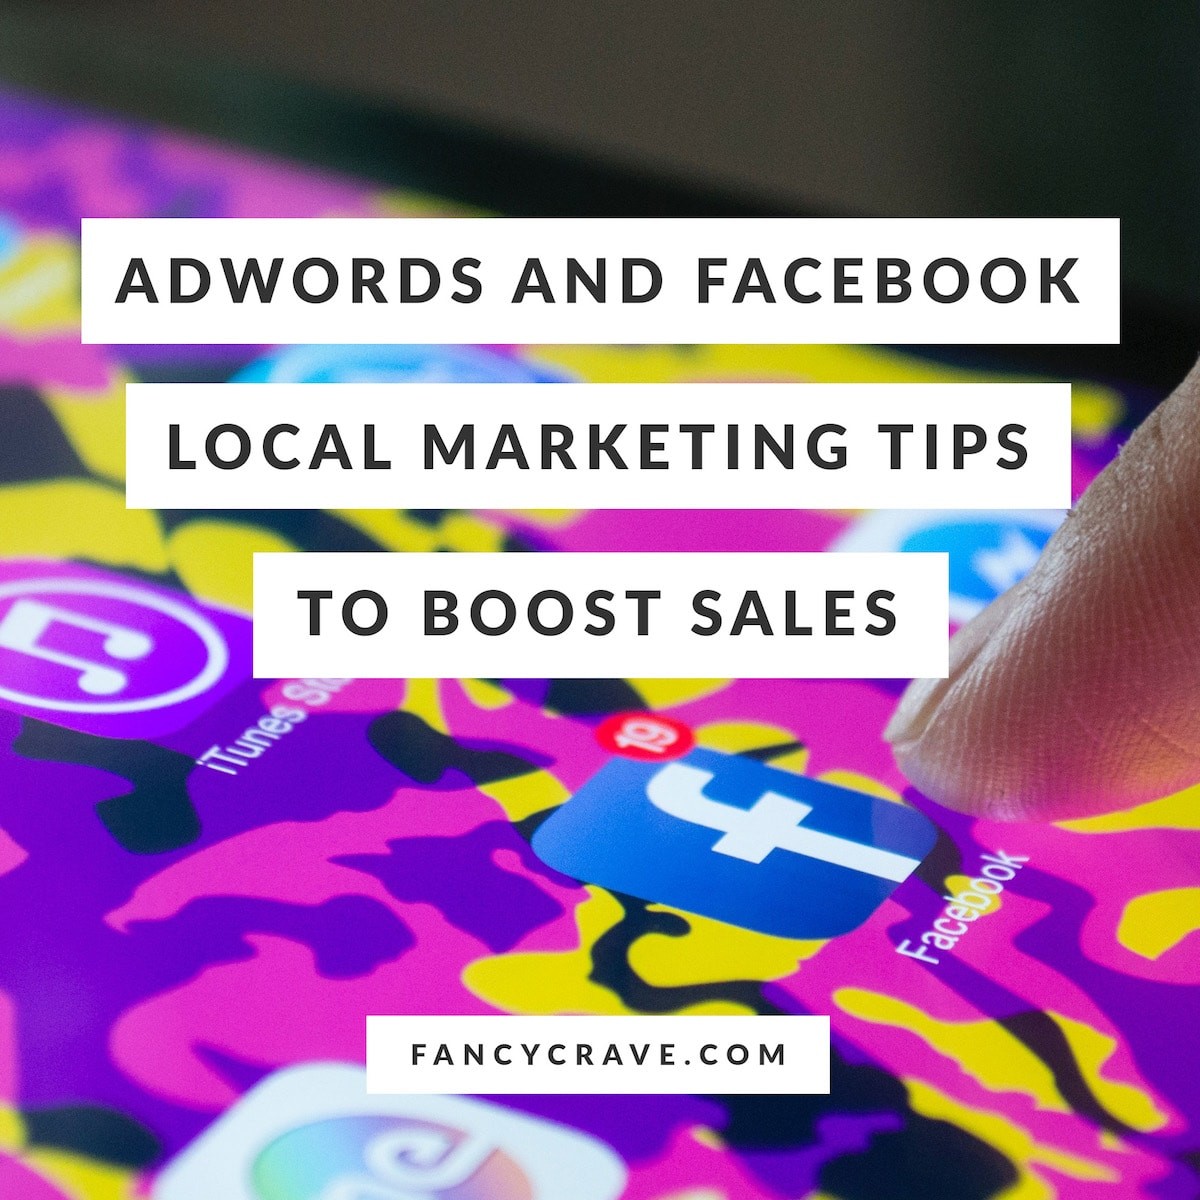 Adwords and facebook marekting tips to boost sales